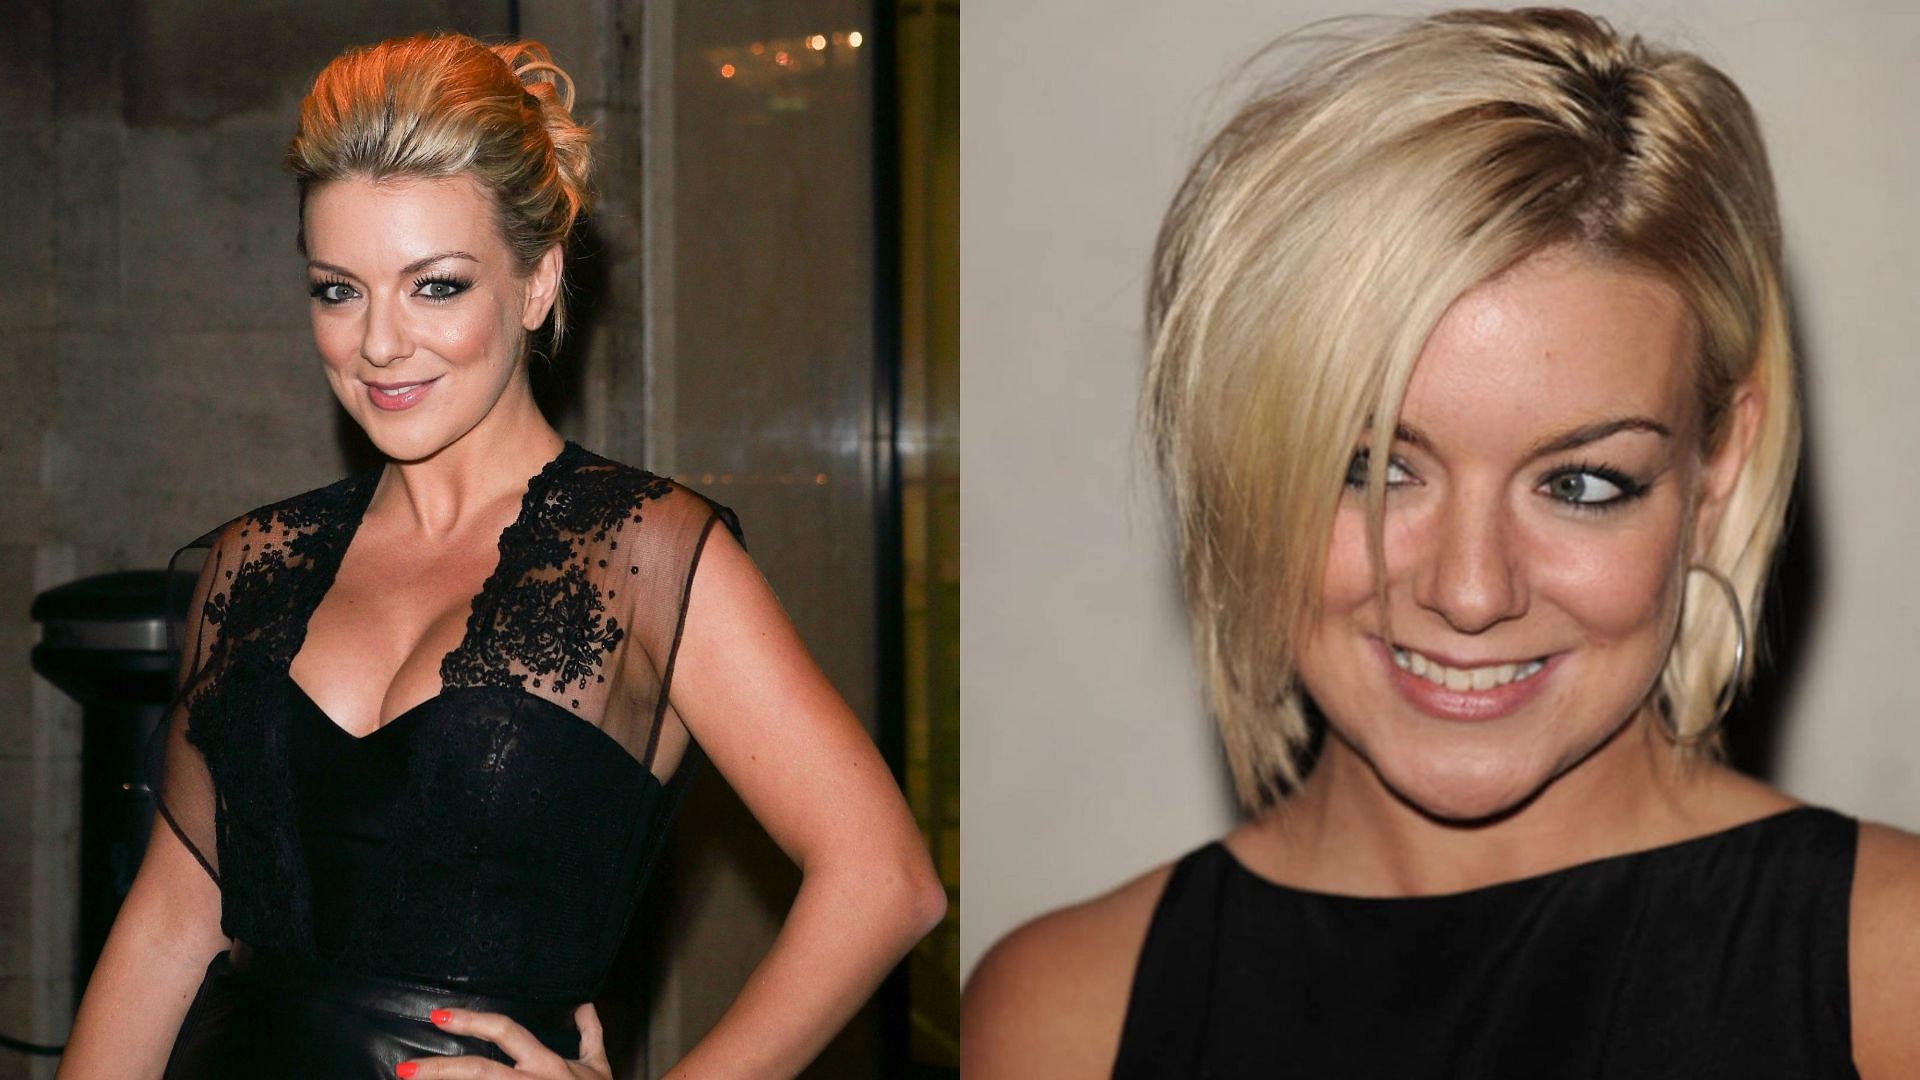 Sheridan Smith was rumored to date a former WWE Superstar